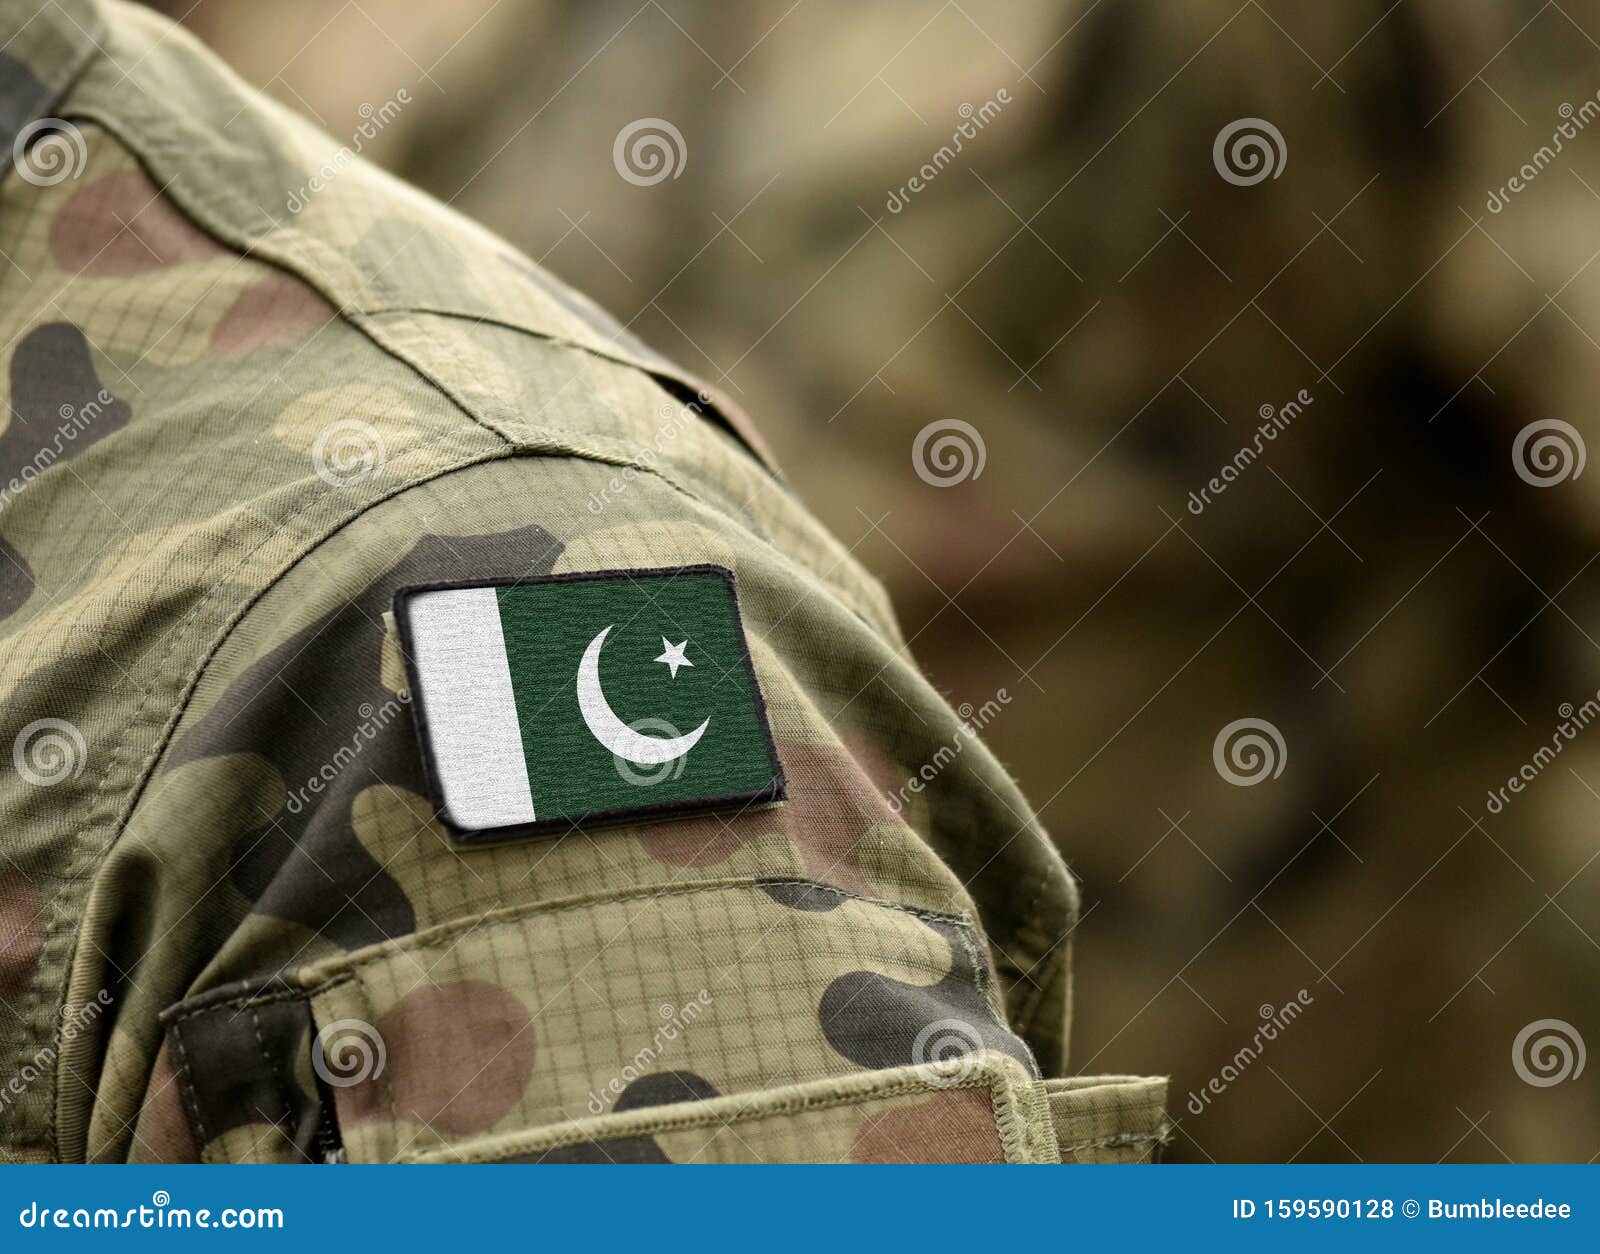 Flag of Pakistan on Military Uniforms Collage Stock Photo - Image of ...